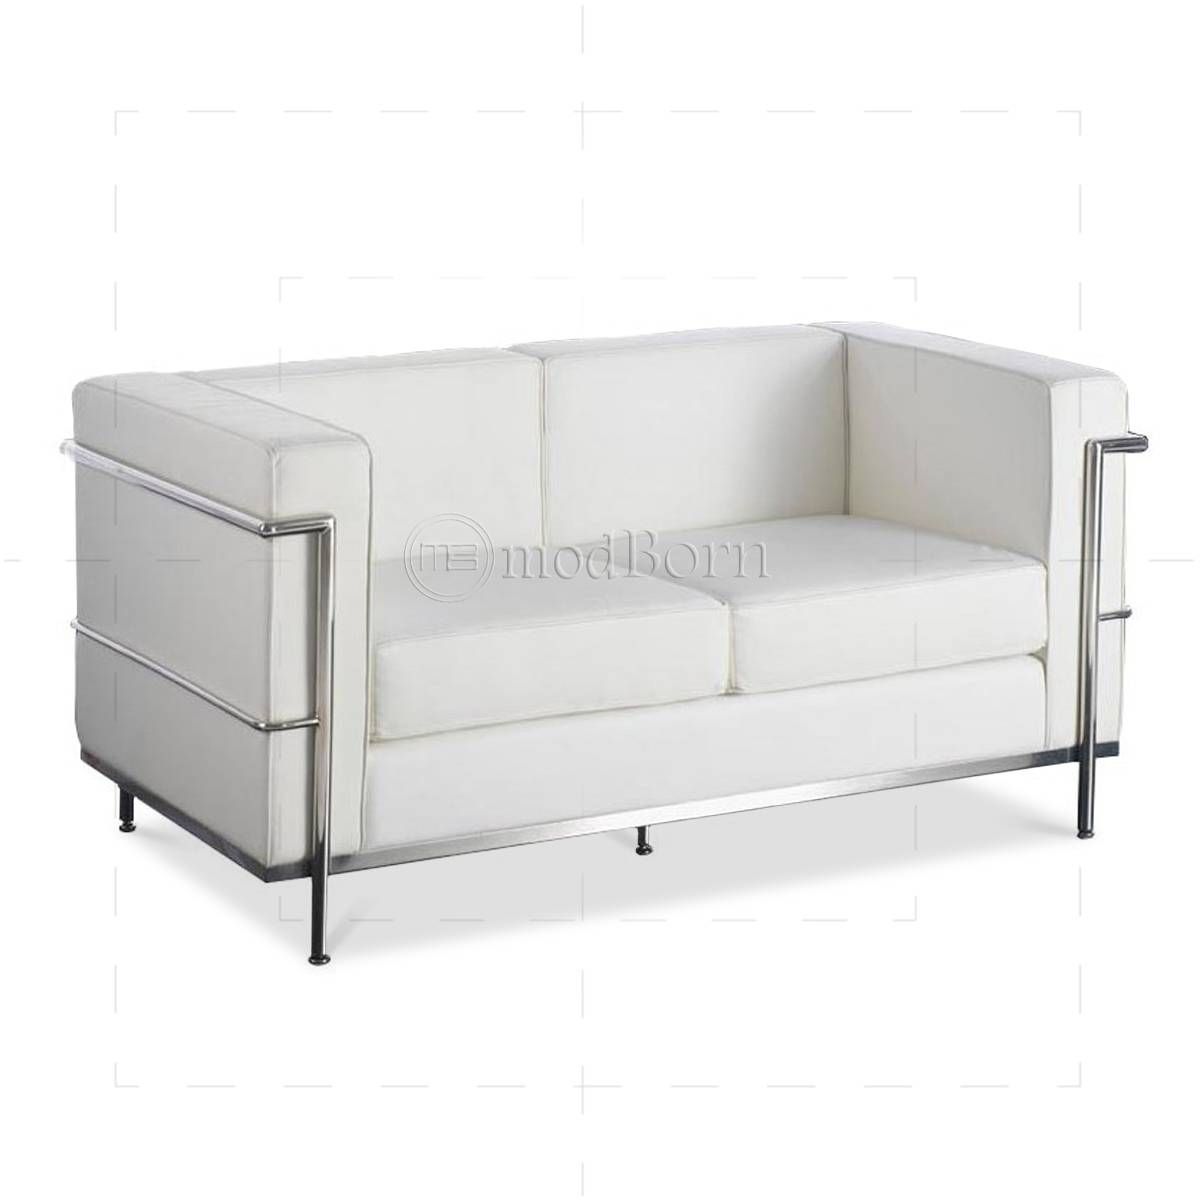 Small Seater Sofa With Design Ideas 17960 | Kengire Within Small 2 Seater Sofas (View 17 of 30)